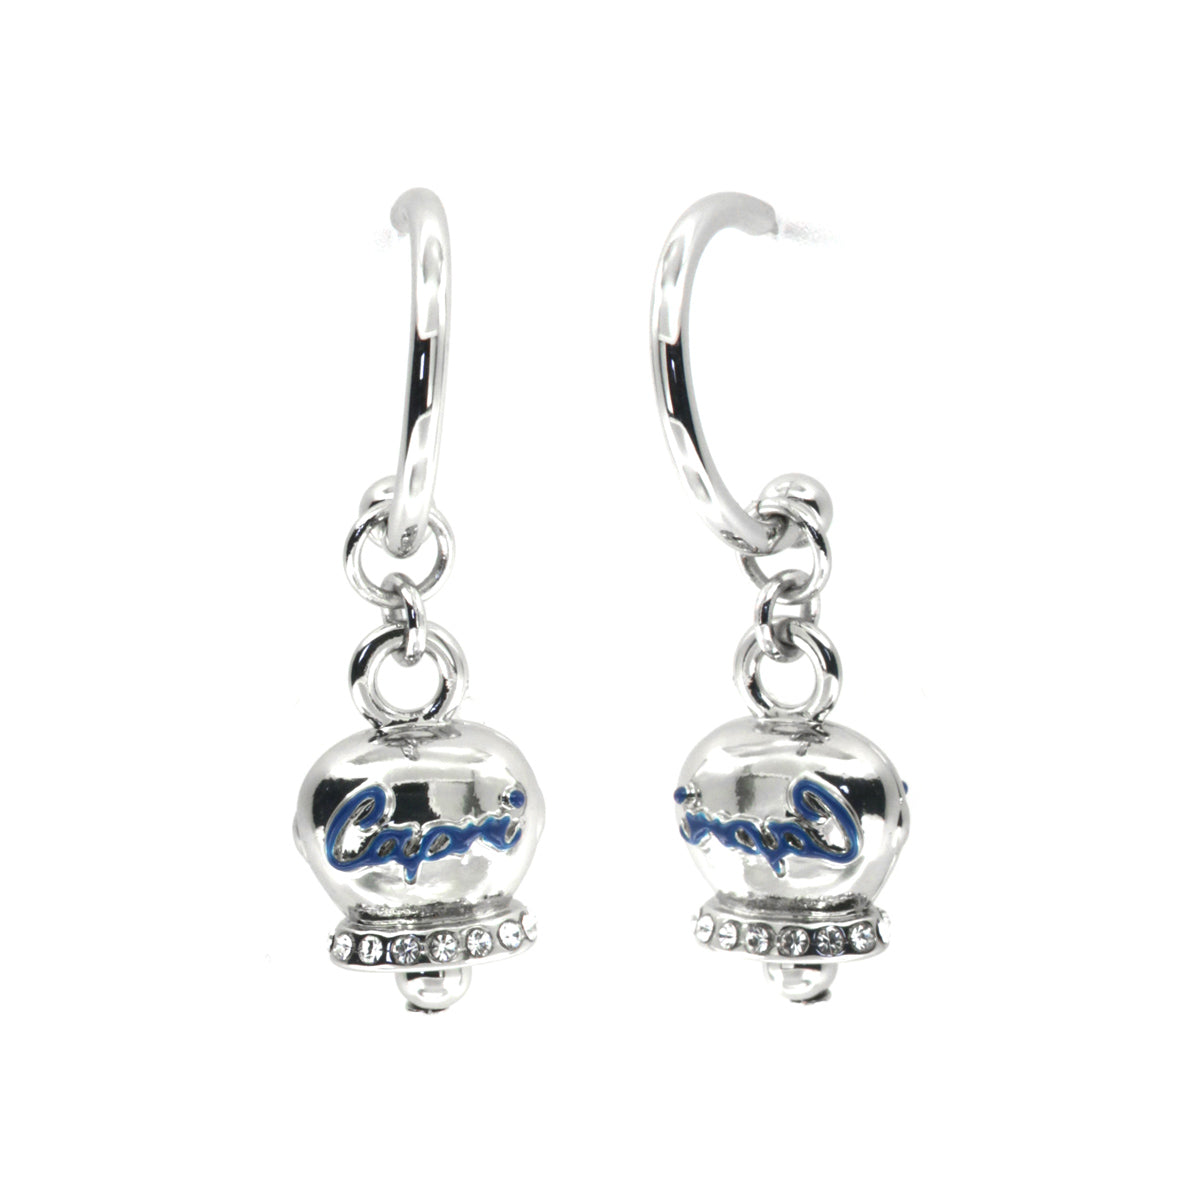 Metal earrings circles with a pendant bell embellished with crystals and writings in blue enamel capri